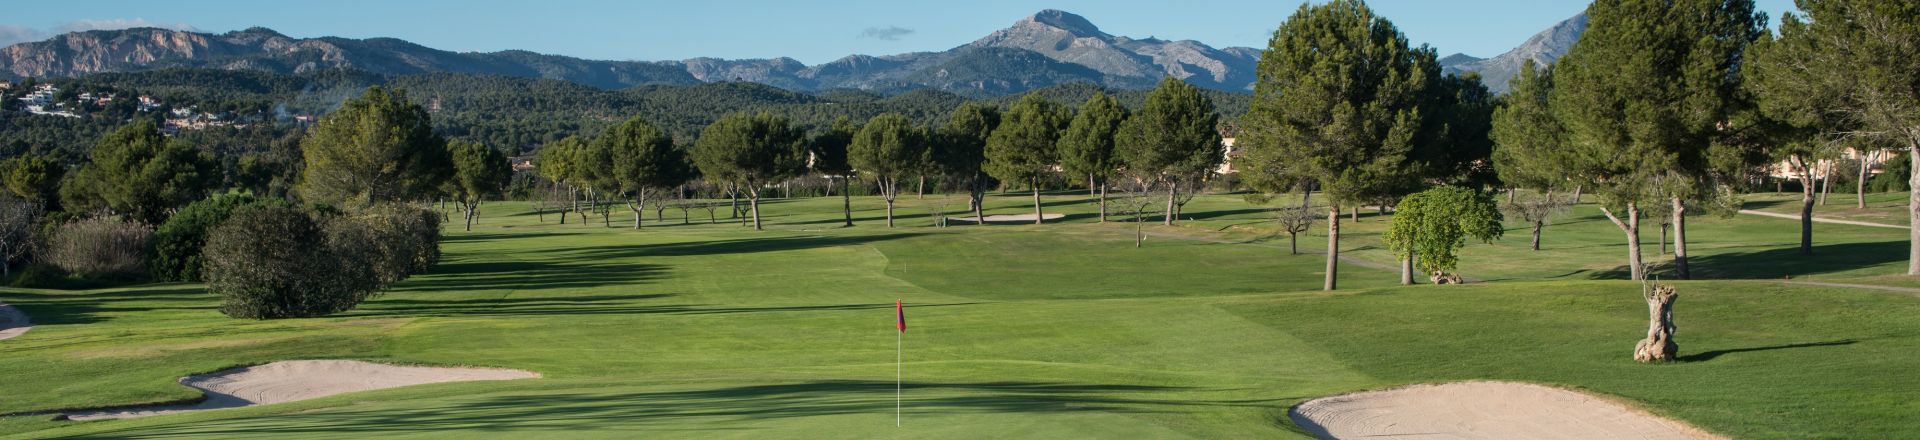 Embark on a golfing adventure at Golf Santa Ponsa I. This captivating image captures the essence of a premier golfing destination in Mallorca, Spain, featuring meticulously designed fairways against the backdrop of lush Mediterranean landscapes.